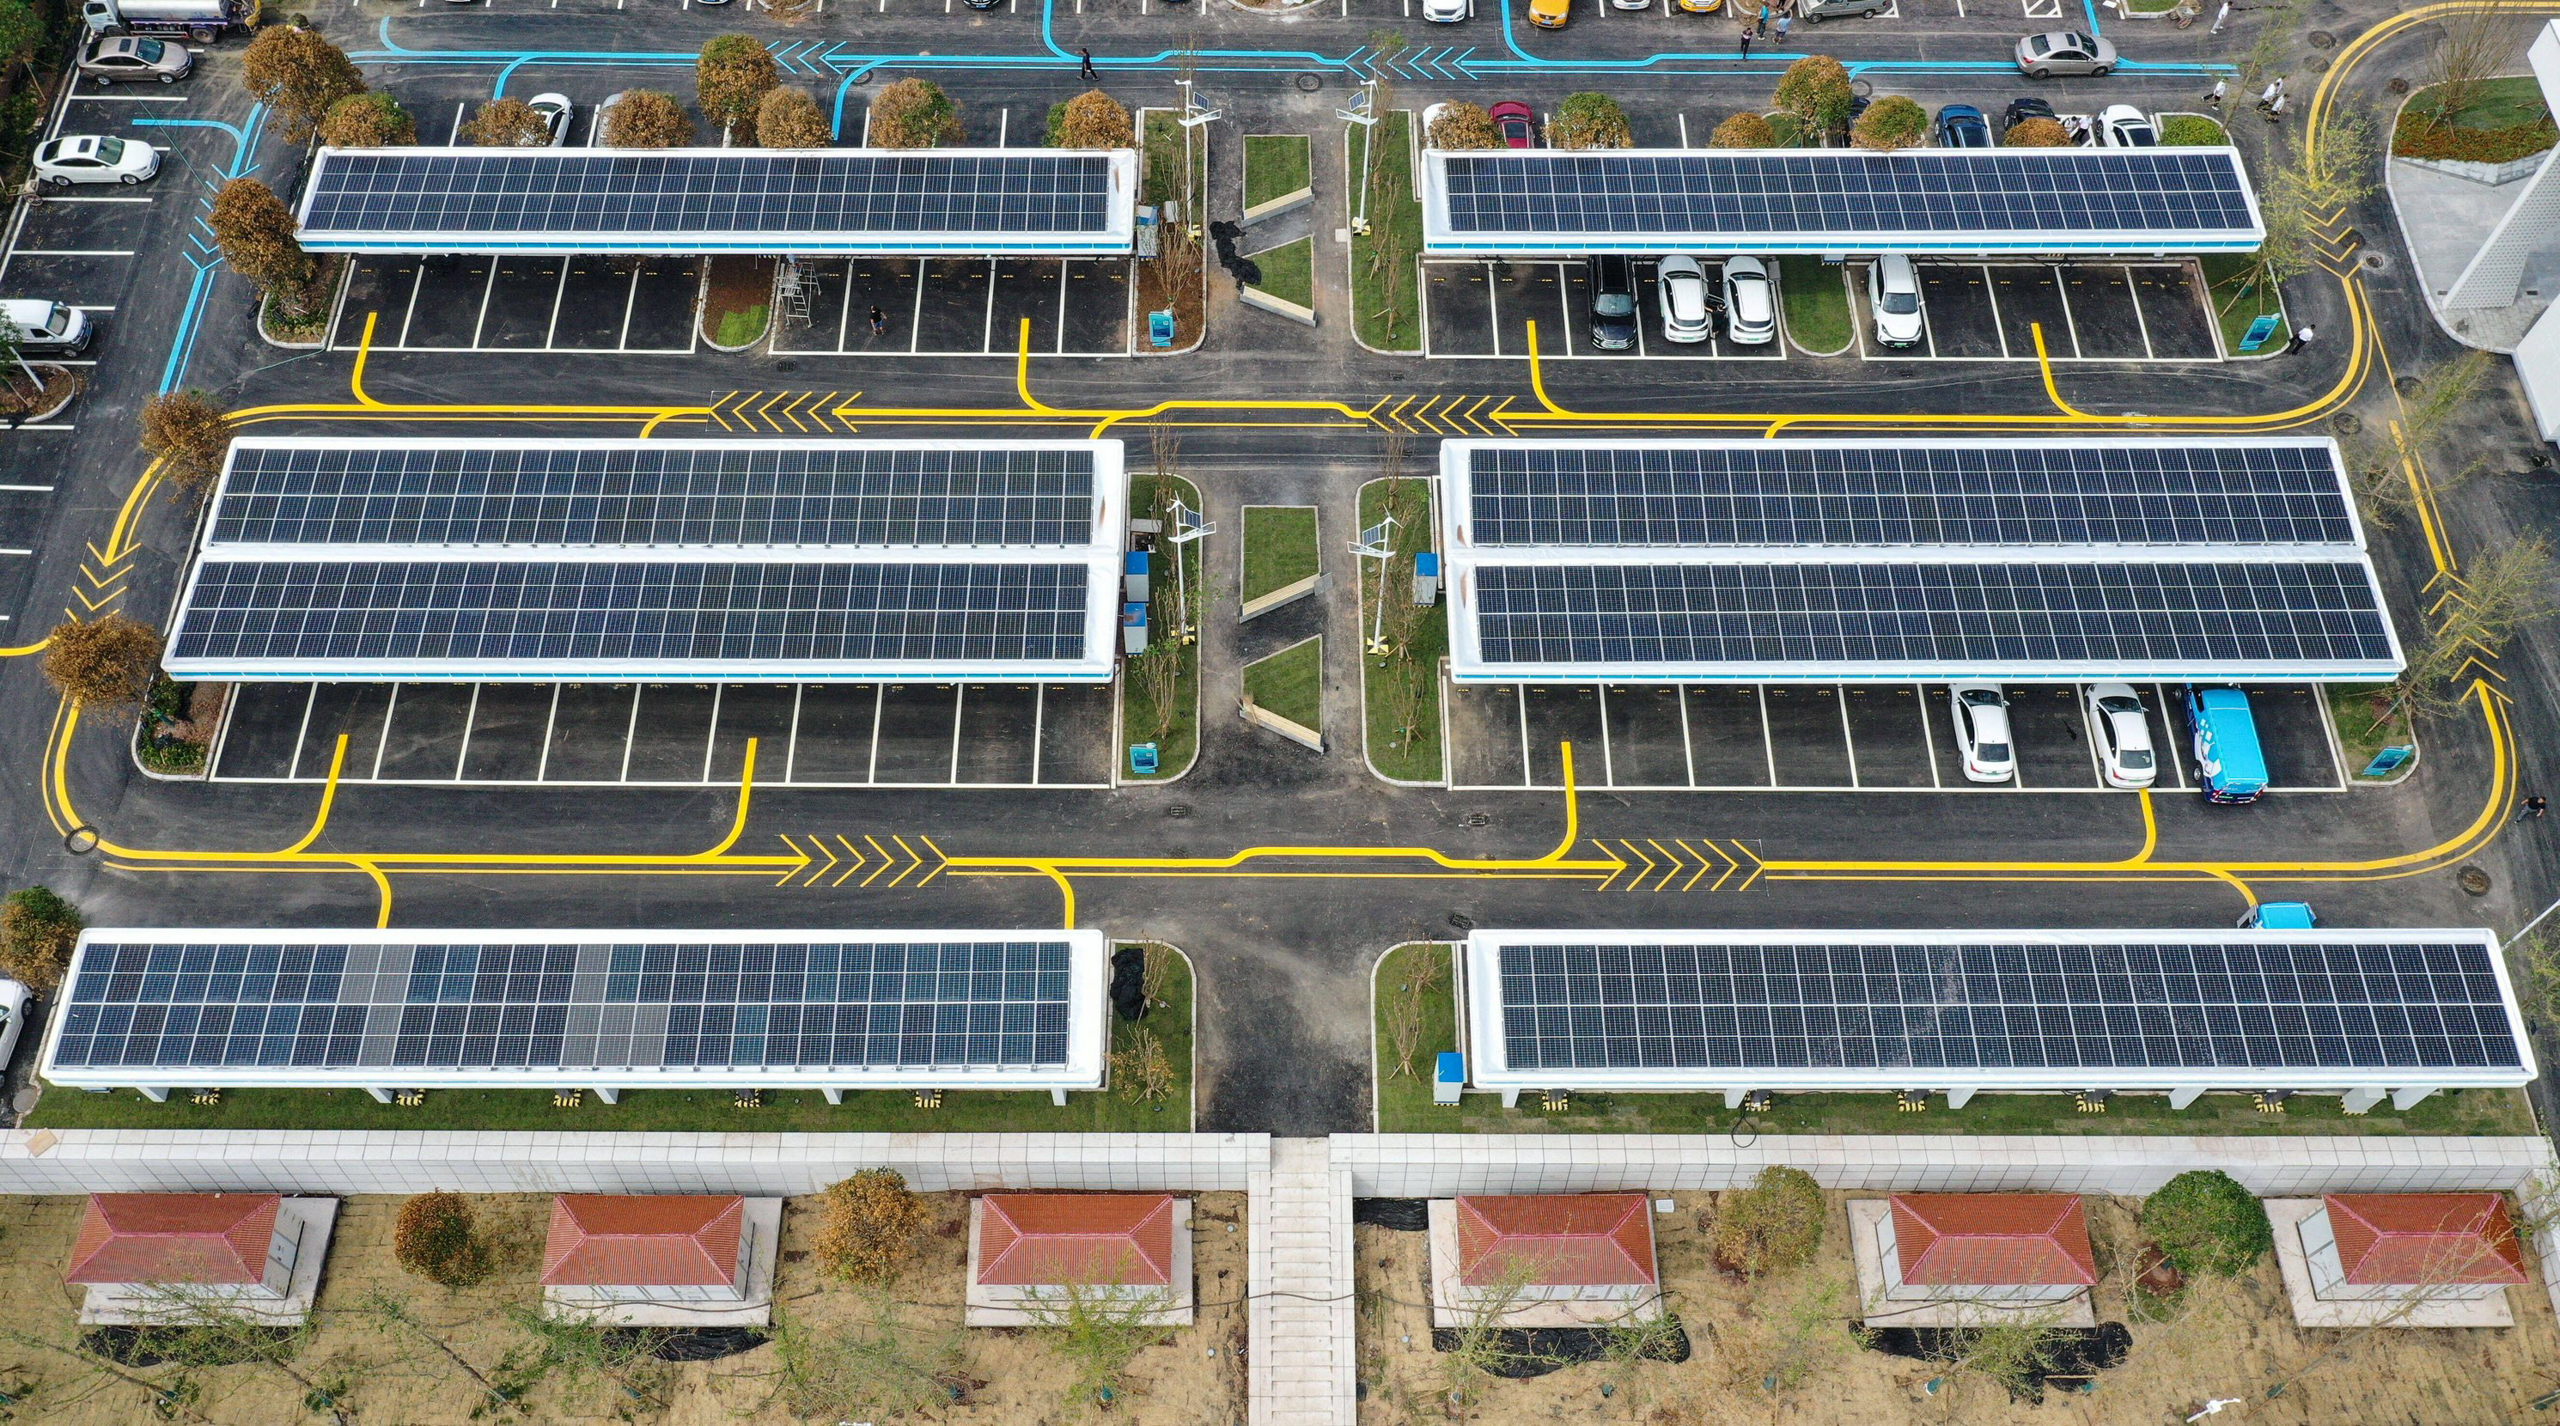 <p>A solar-powered charging station in Yibin, south-west China. Two-way charging could give vehicles like these the potential to stabilise power supplies by discharging stored electricity back to the grid. (Image: Wang Xi / Alamy)</p>